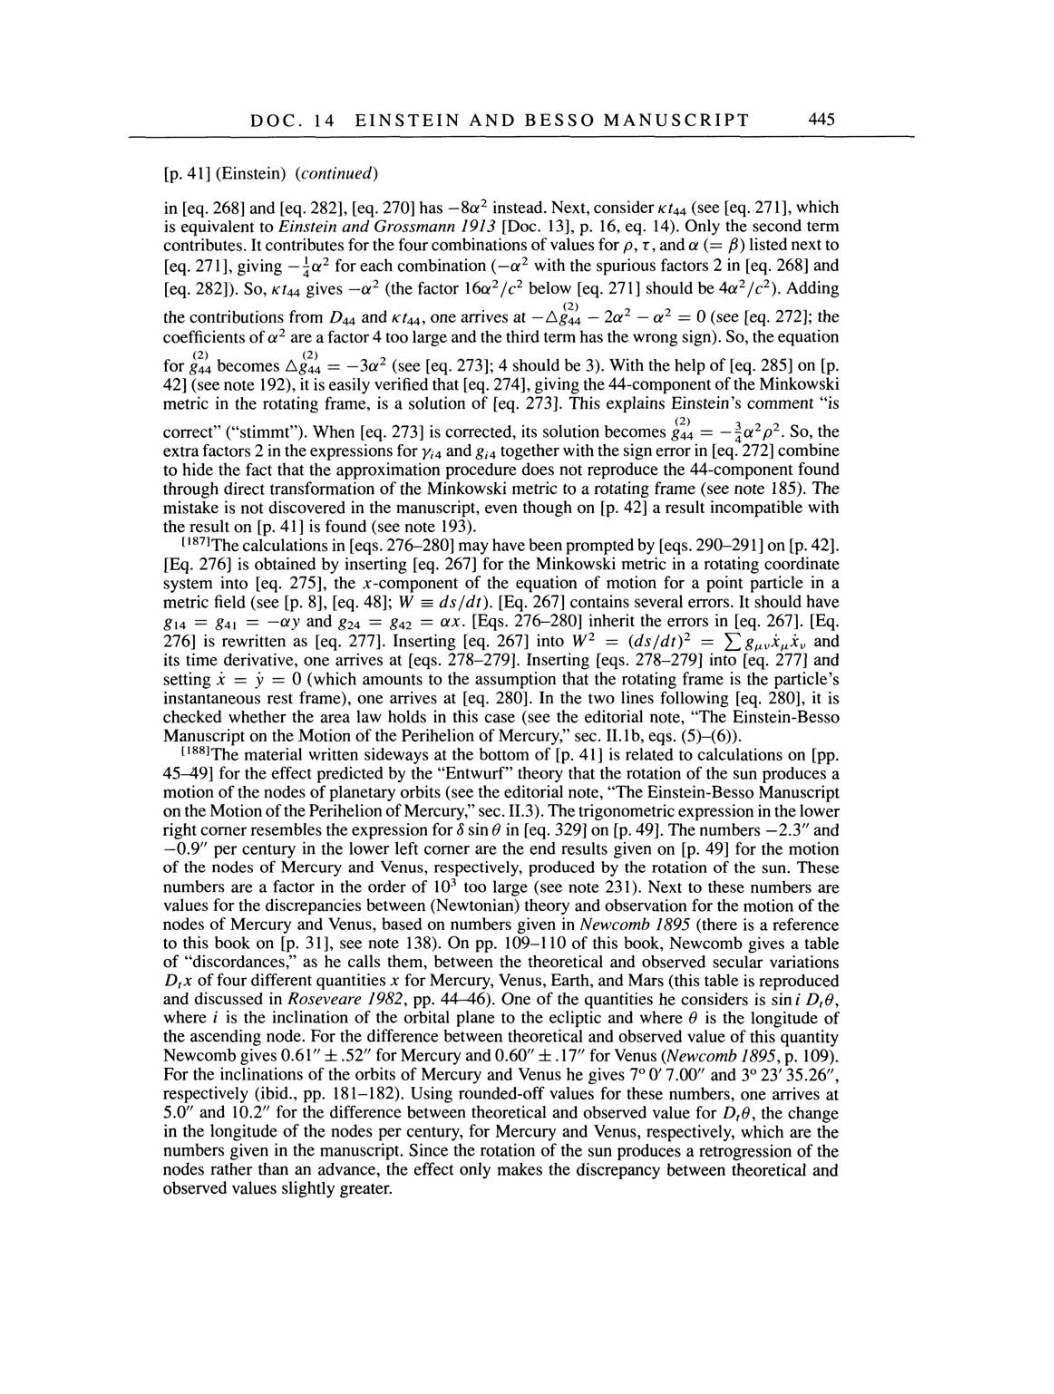 Volume 4: The Swiss Years: Writings 1912-1914 page 445